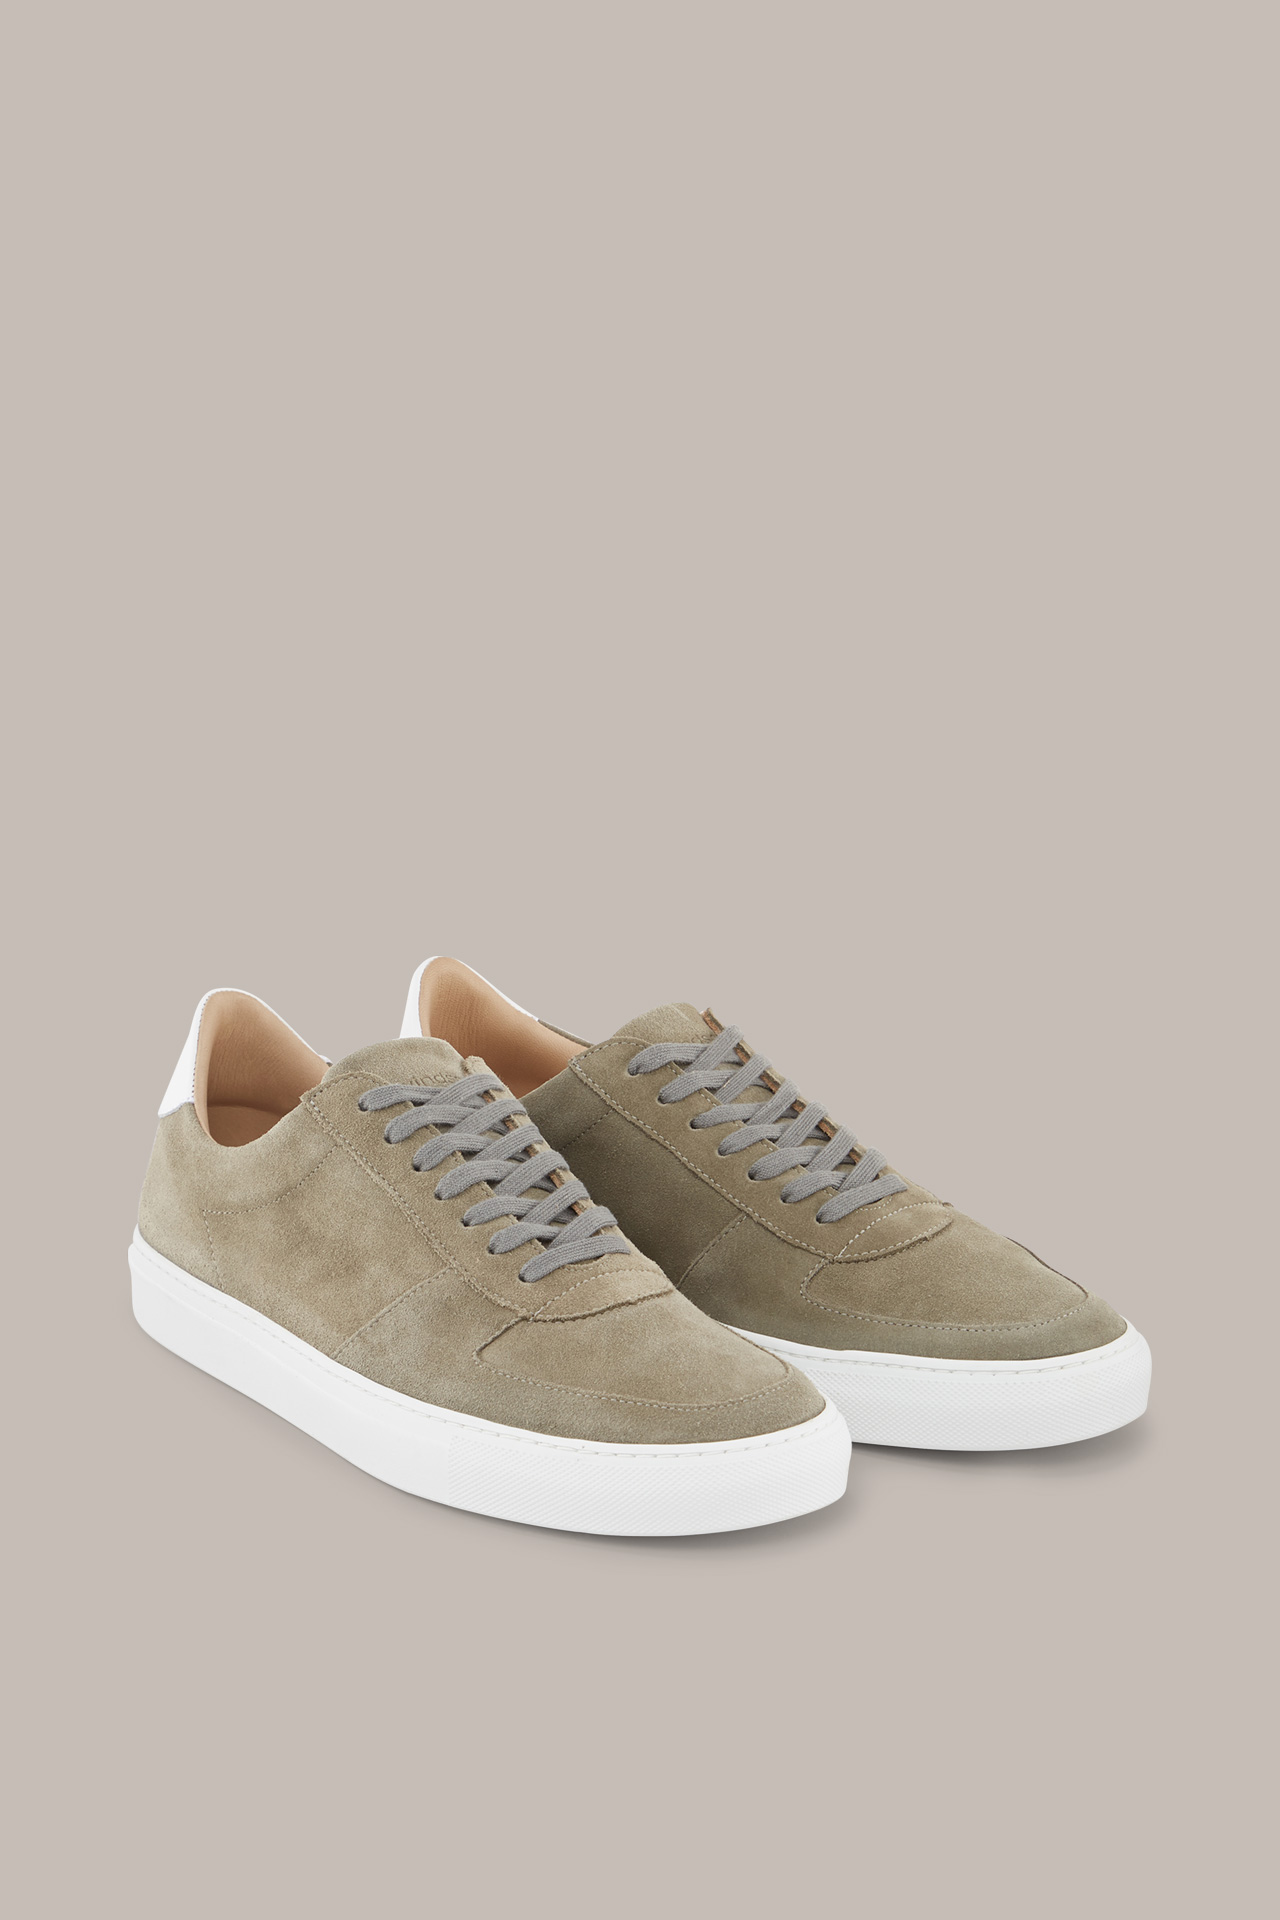  Baskets Flat Breeze by Ludwig Reiter, coloris olive et blanc